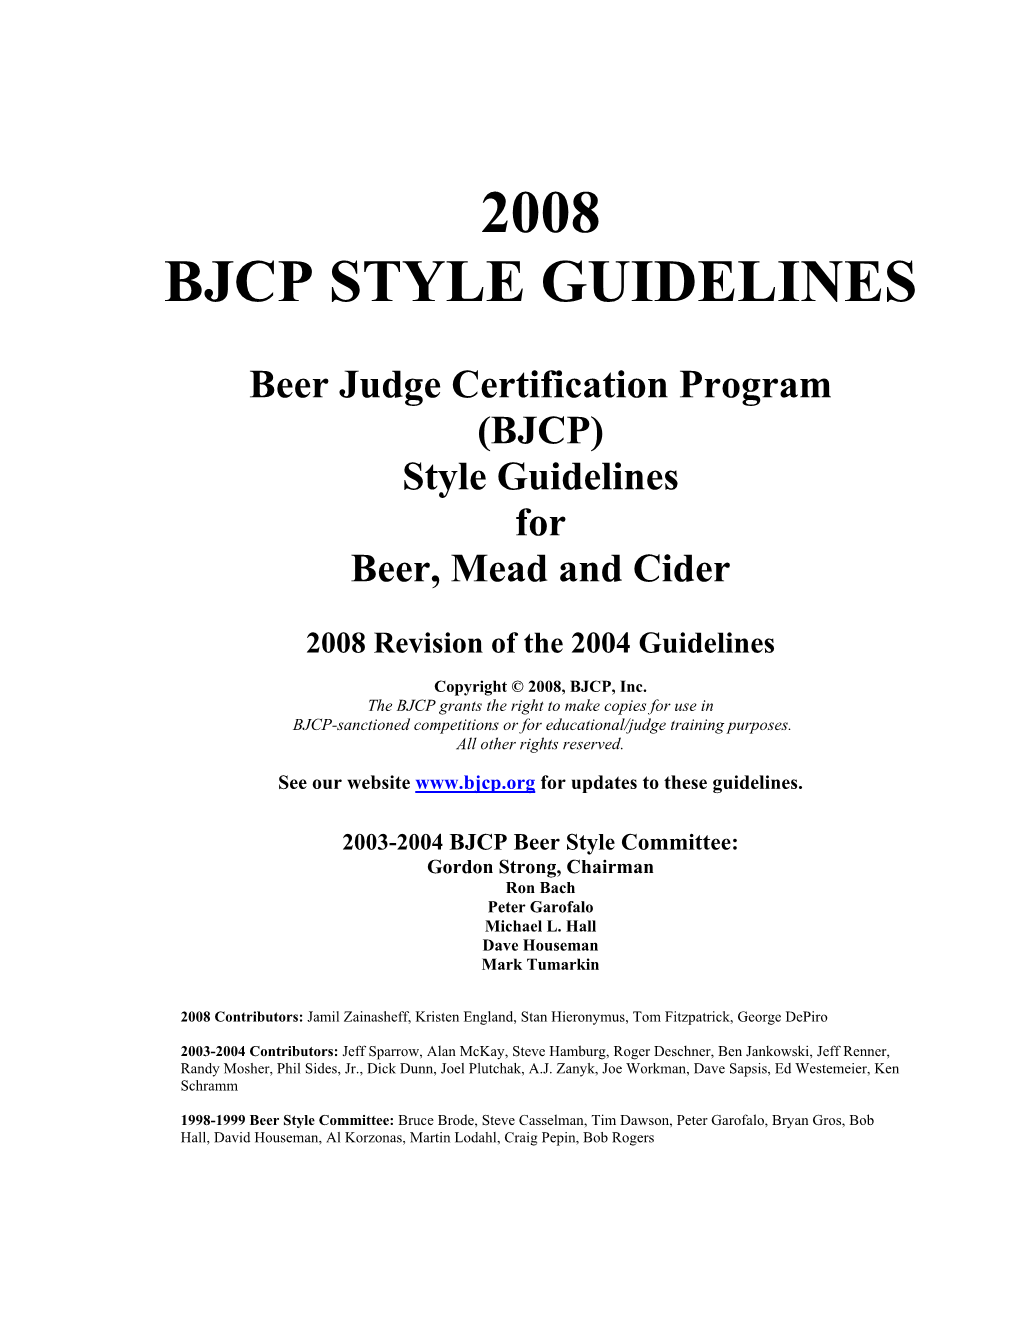 BJCP 2004 Style Guidelines, 2008